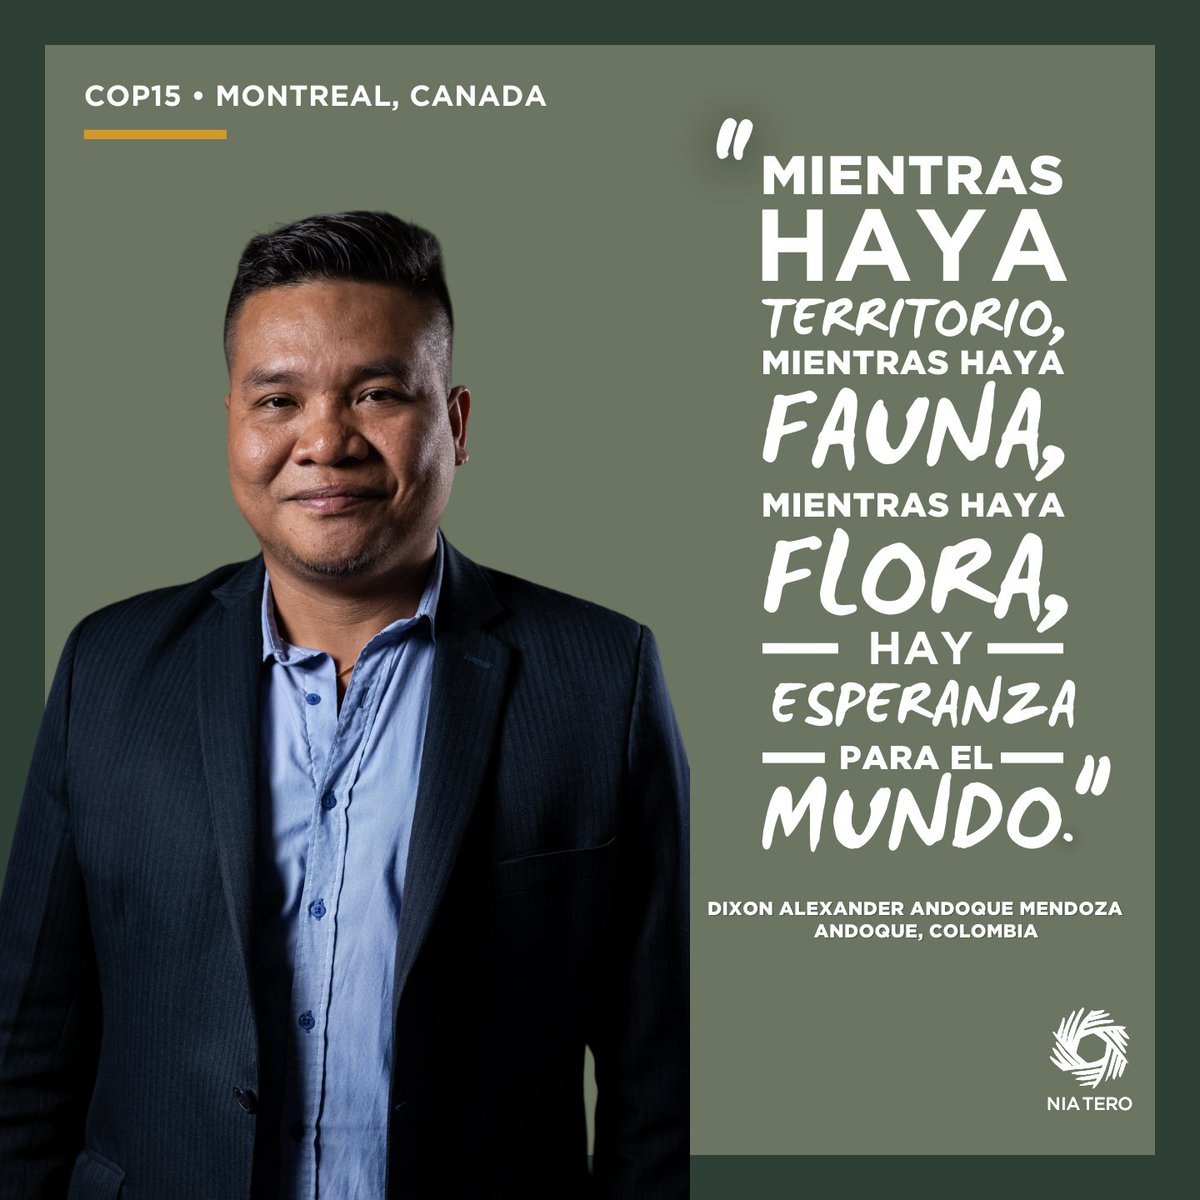 'As long as there is territory, as long as there is fauna, as long as there is flora, there is hope for the world.' - Dixon Alexander Andoque Mendoza (Andoke, Colombia)

#IndigenousGuardians #COP15